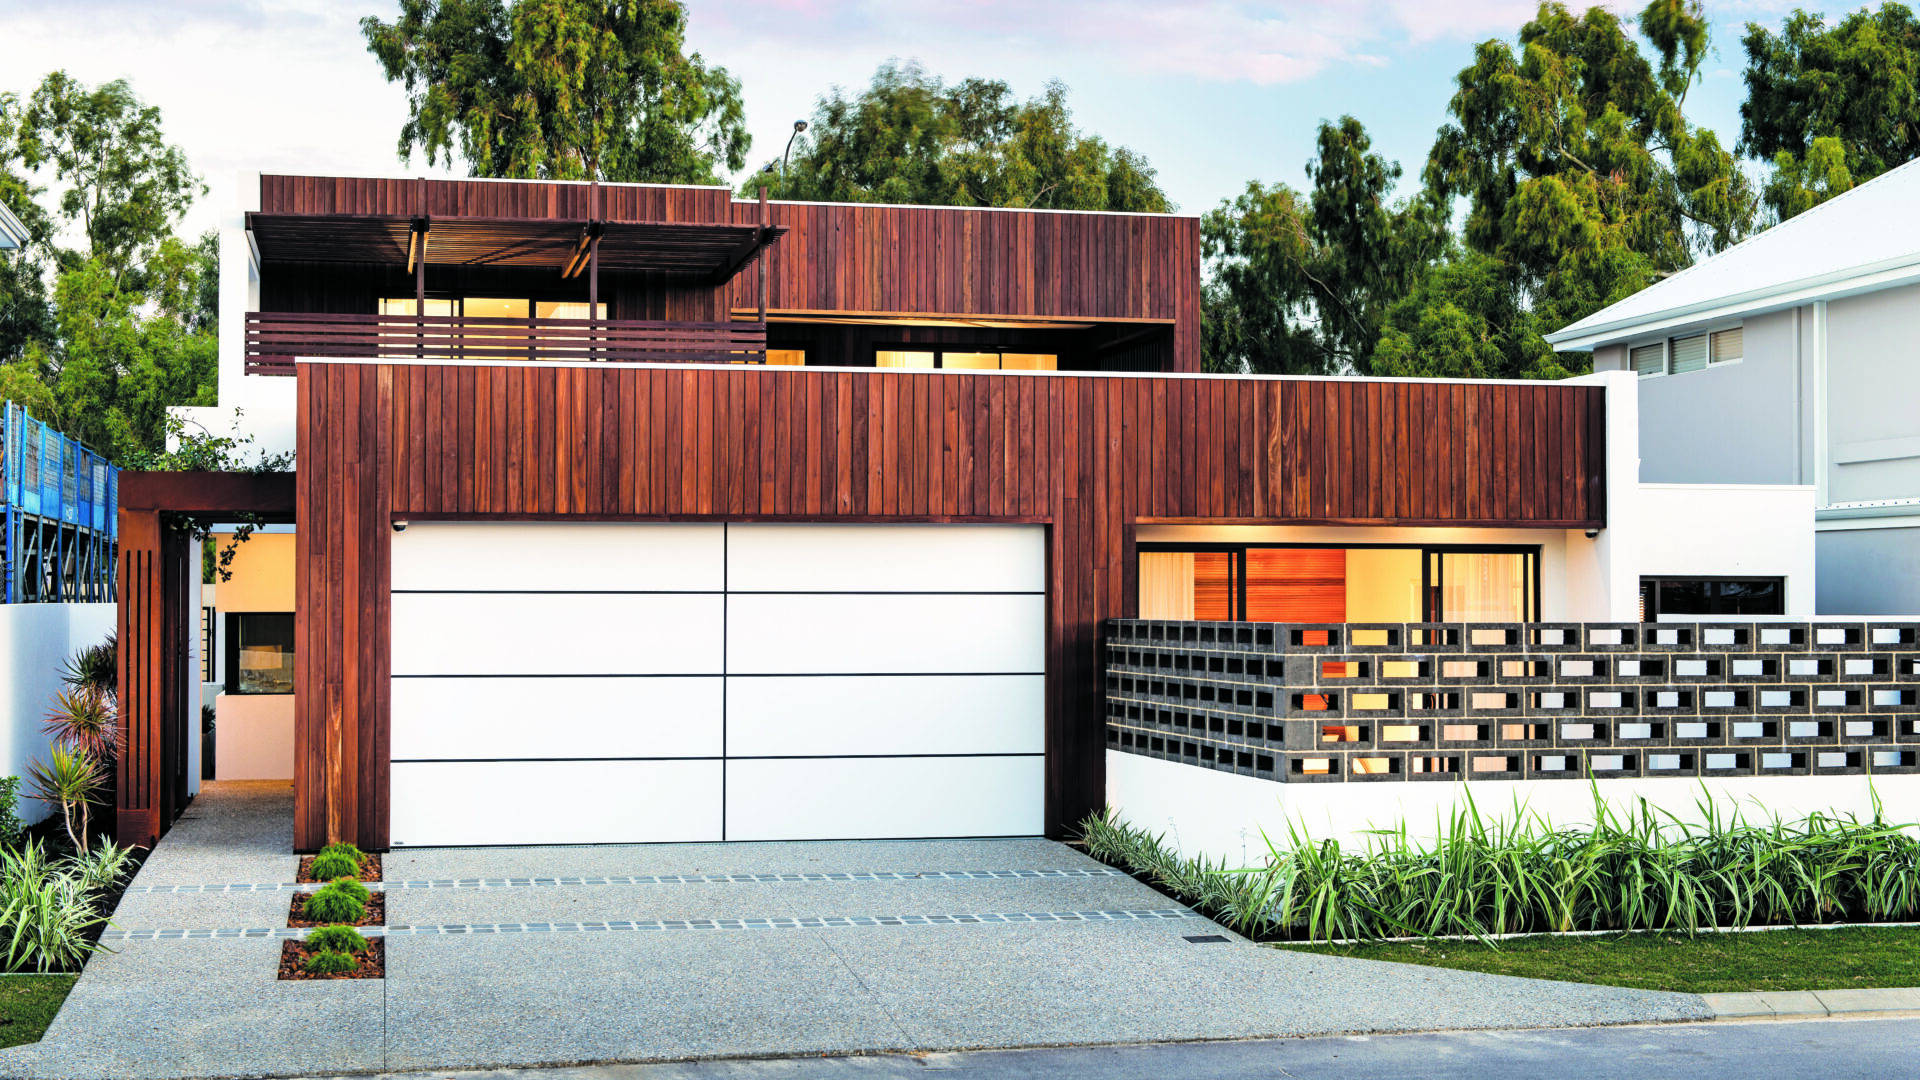 Warehaus: Industrial style home - exterior